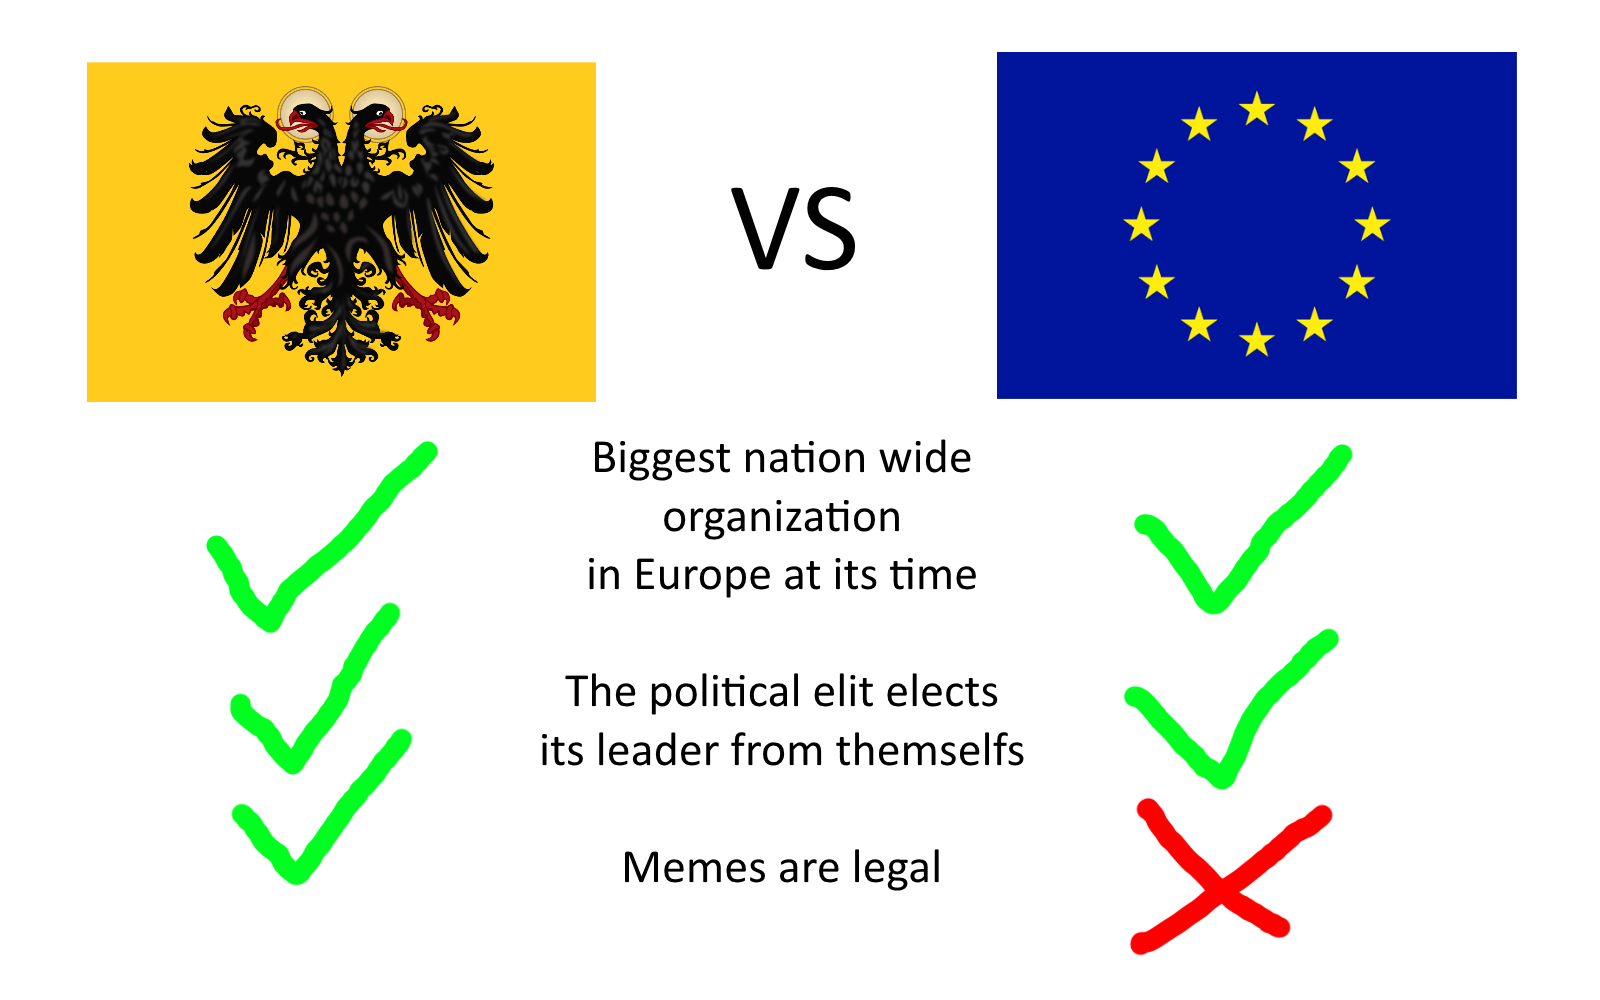 bring back the roman empire - Biggest nation wide organization in Europe at its time The political elit elects its leader from themselfs Memes are legal